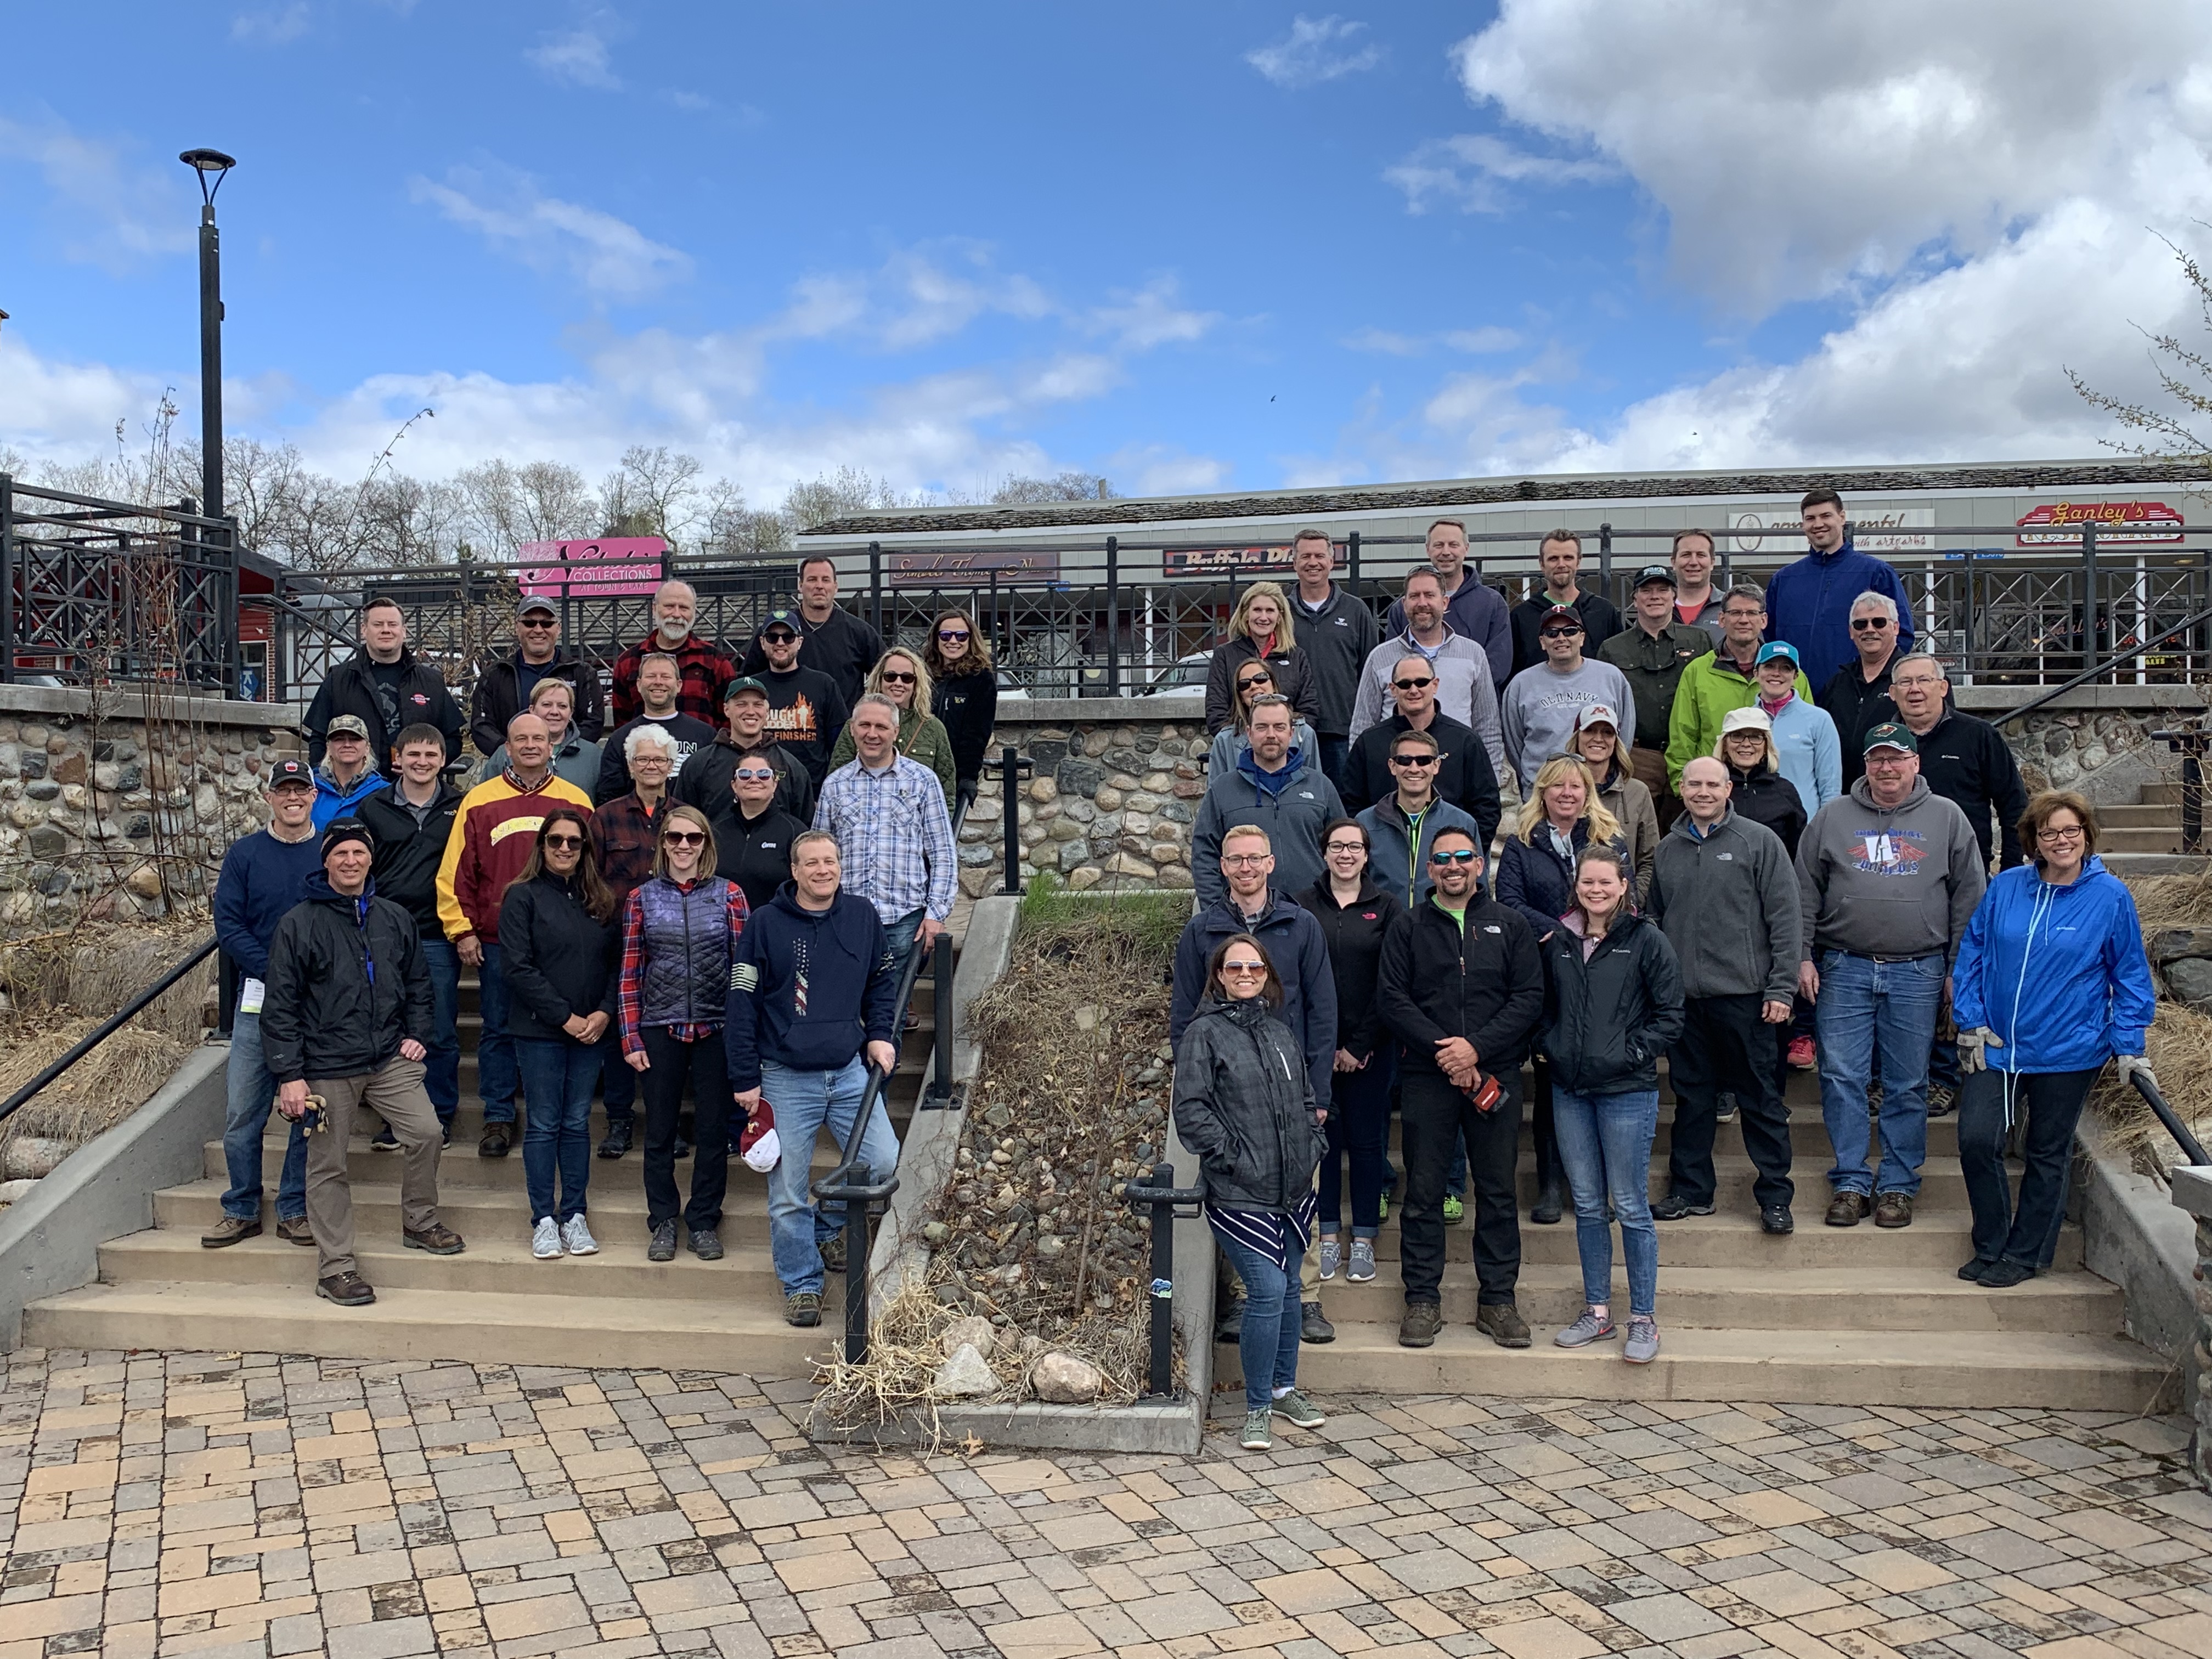 2019 Spring Conference Update